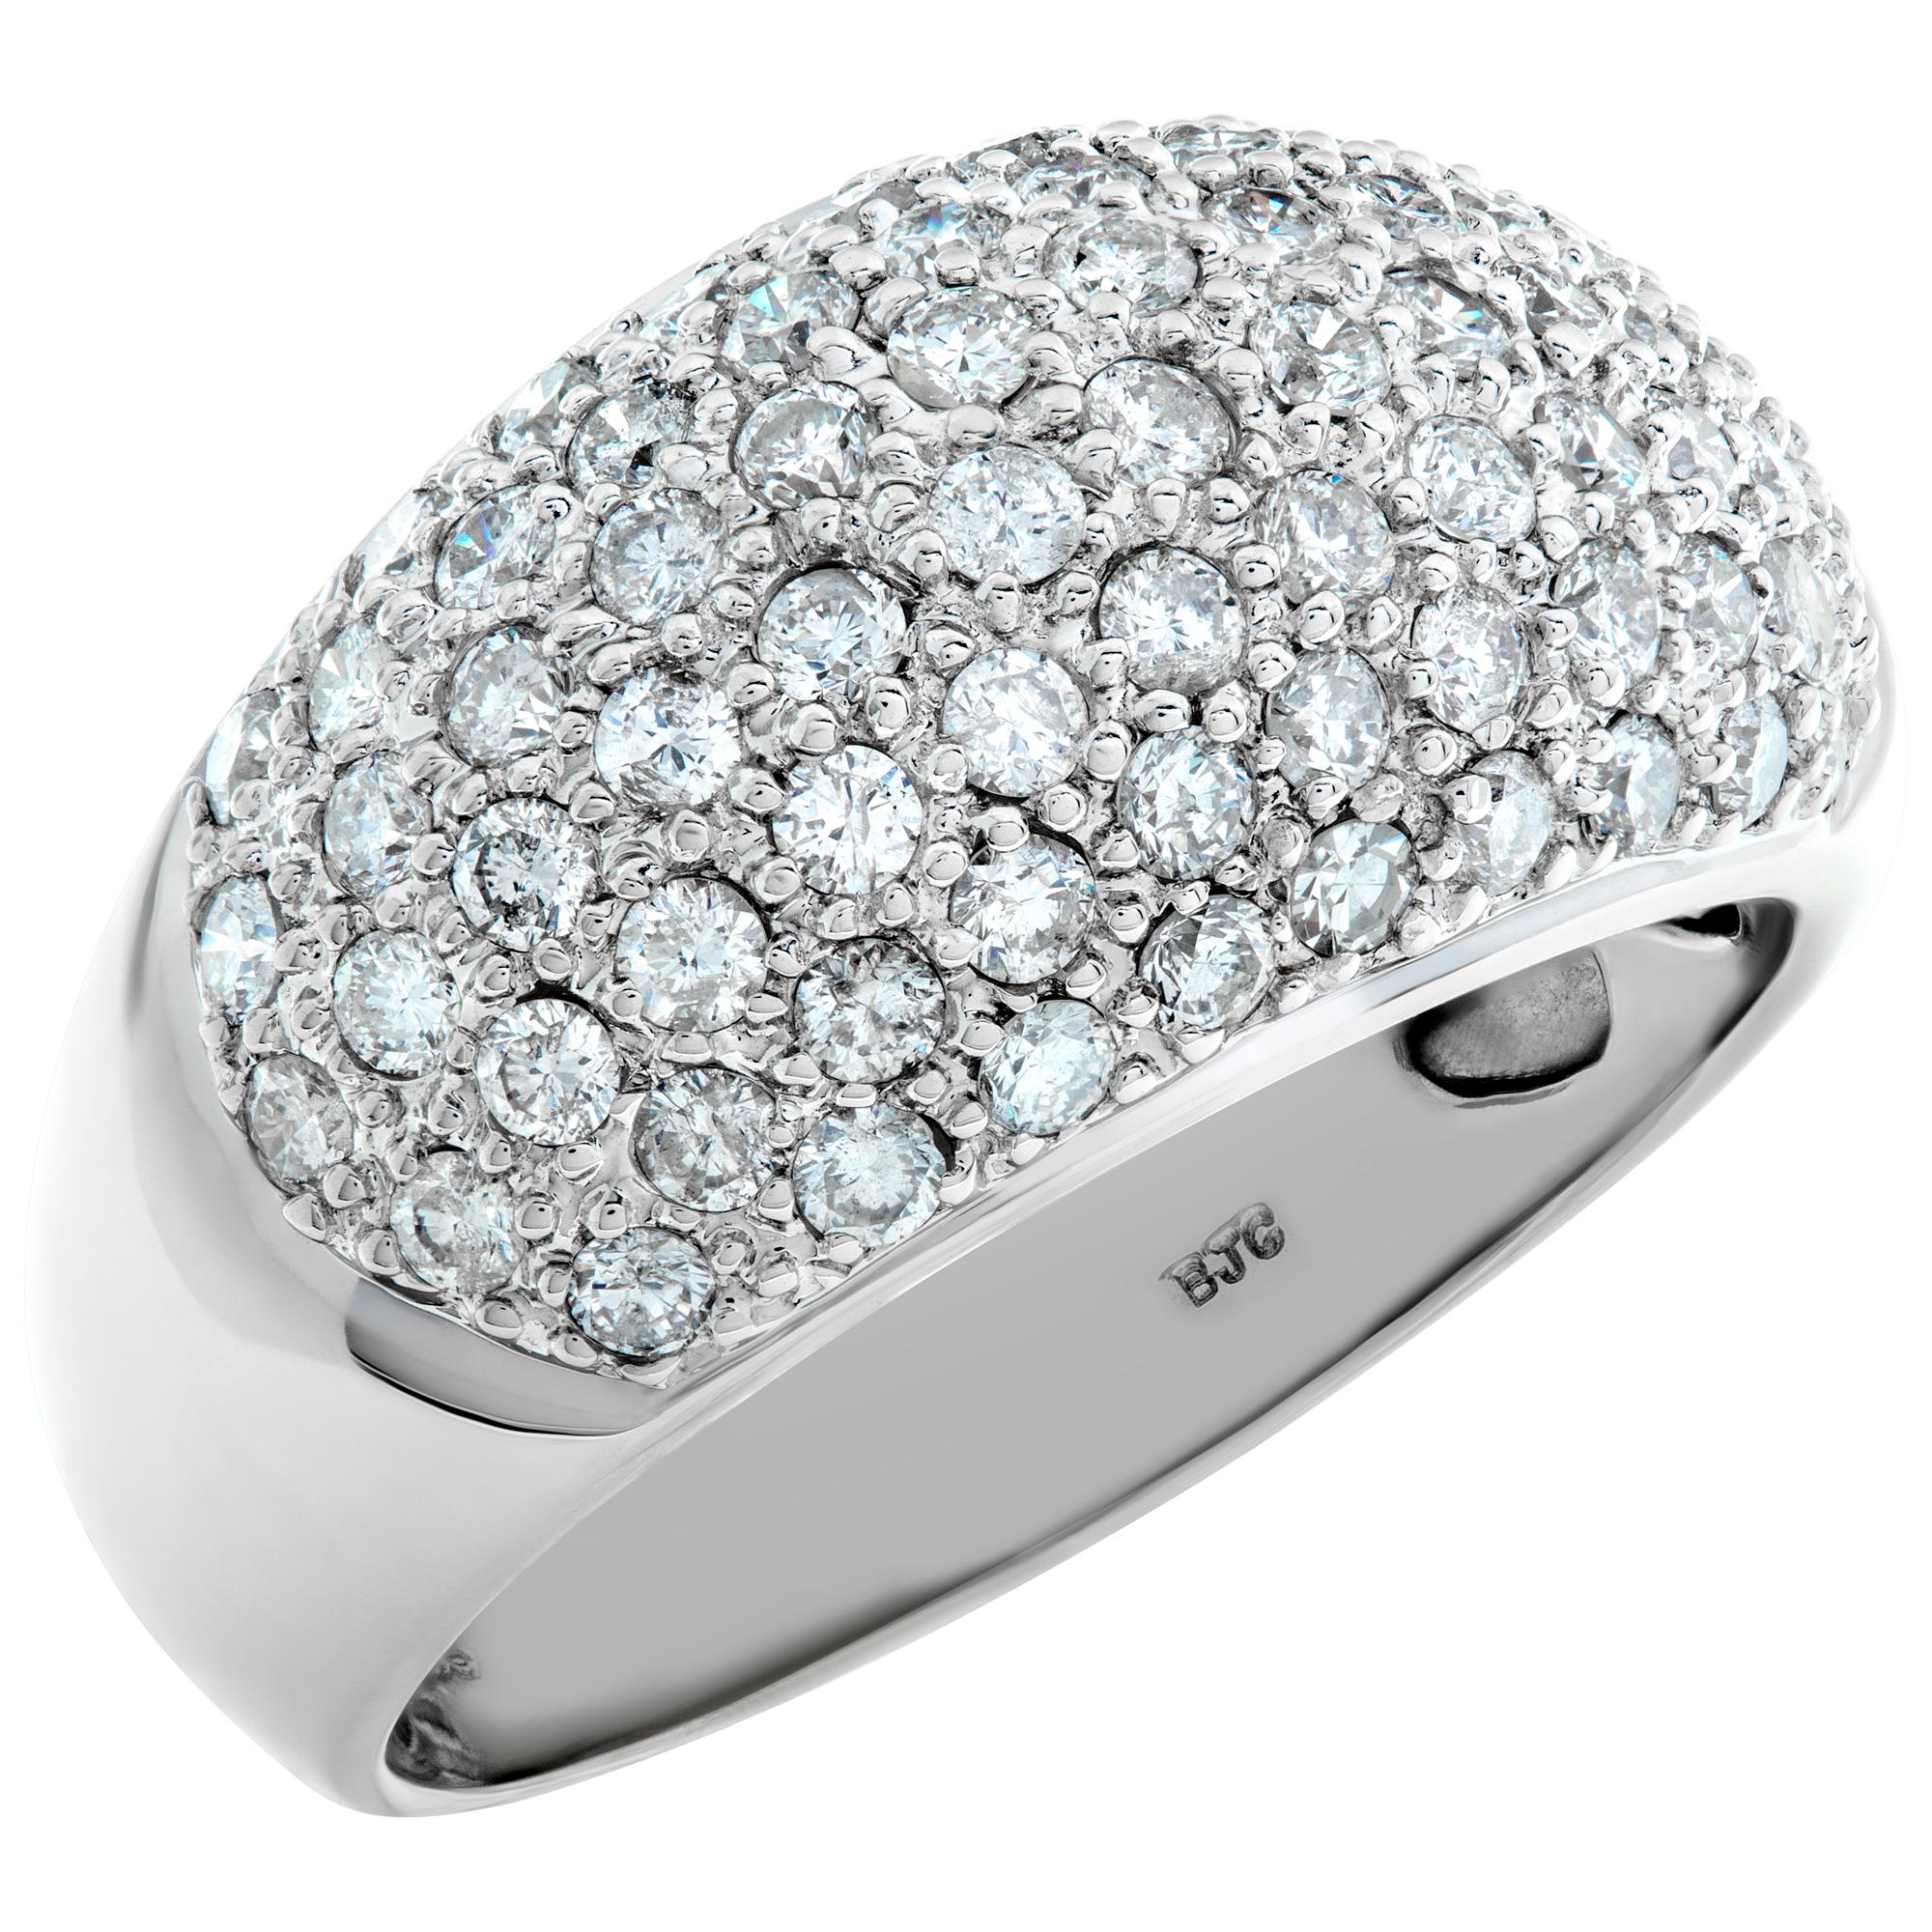 Domed Pave diamond ring in white gold. 3.0 cts in pave diamonds.(G-H, SI2) In Excellent Condition For Sale In Surfside, FL